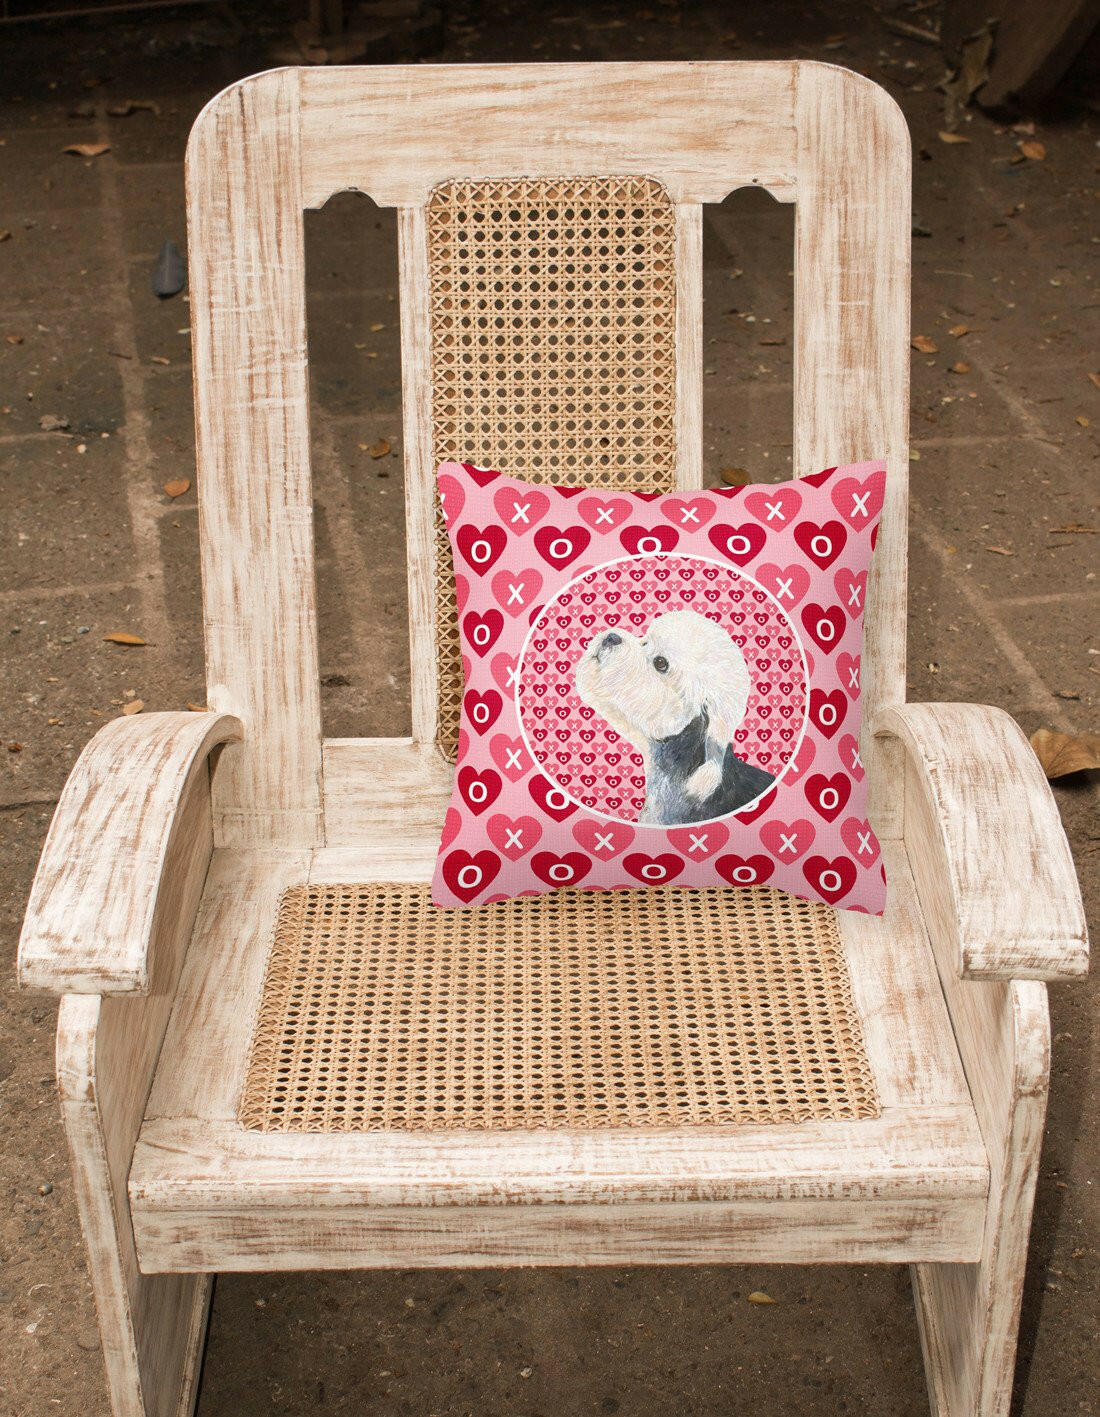 Dandie Dinmont Terrier Hearts Love Valentine's Day Fabric Decorative Pillow SS4503PW1414 by Caroline's Treasures